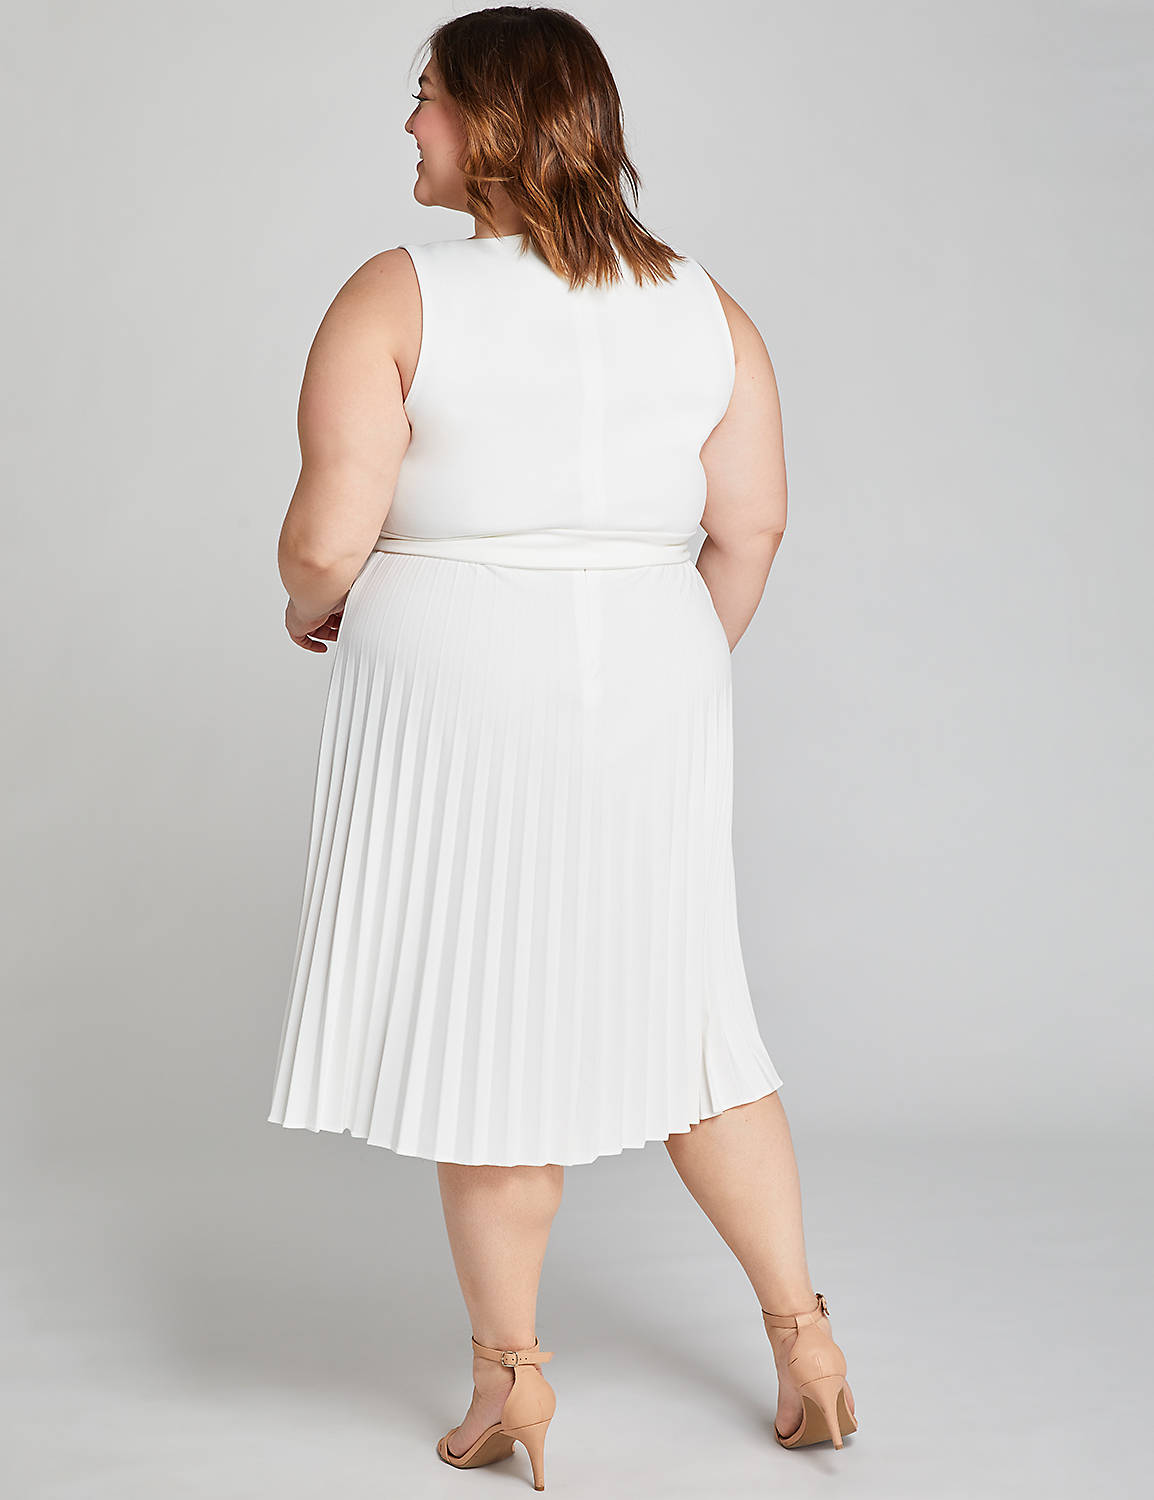 1113198 SLVLS PLEATED SKIRT FF:White 2008:12 Product Image 2